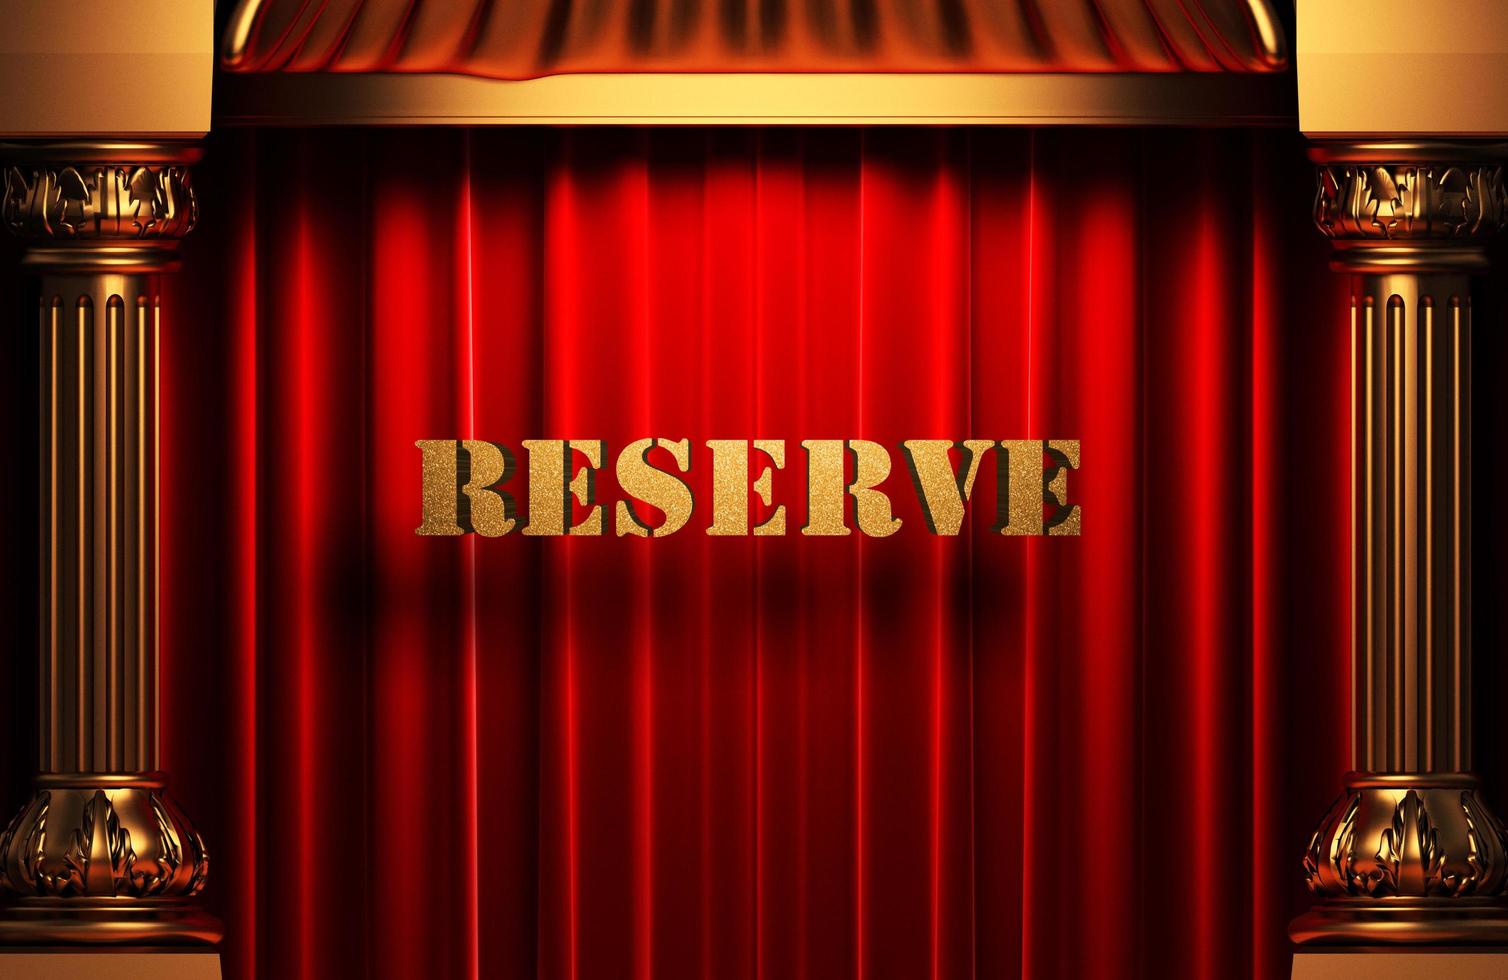 reserve golden word on red curtain photo